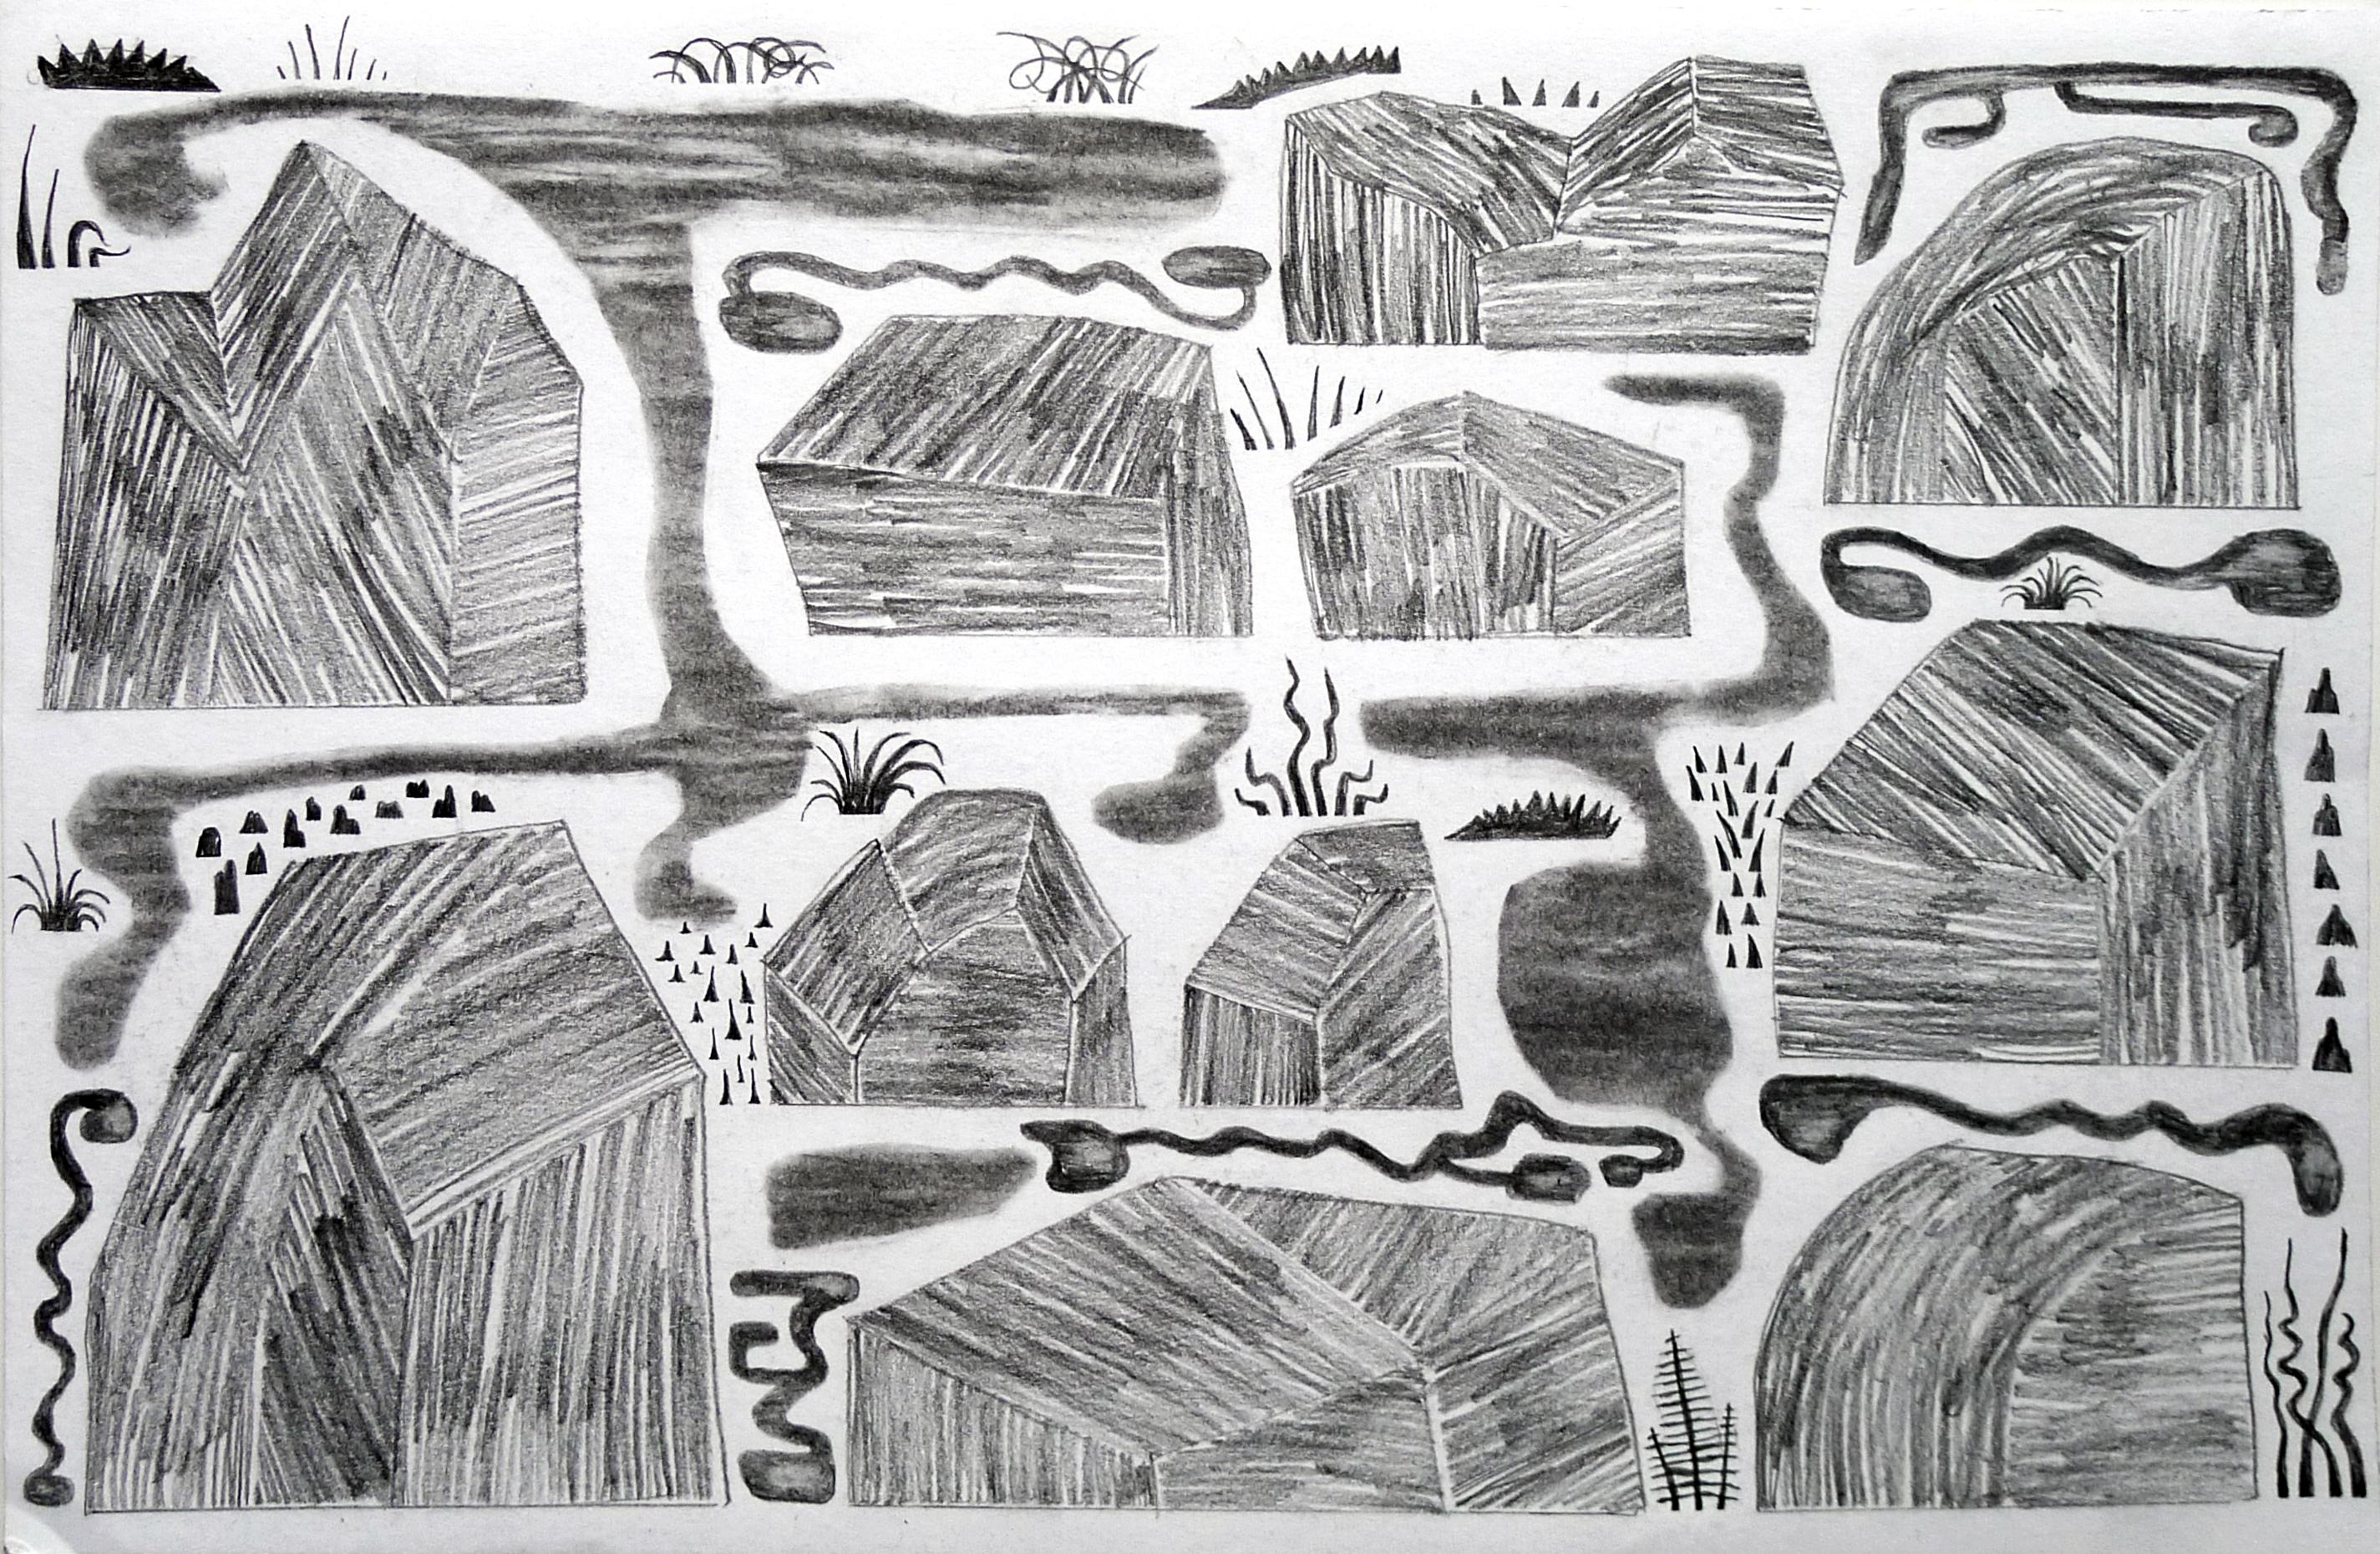 Katrina Bello Landscape Art - Rockscape, small abstracted work on paper, black and white